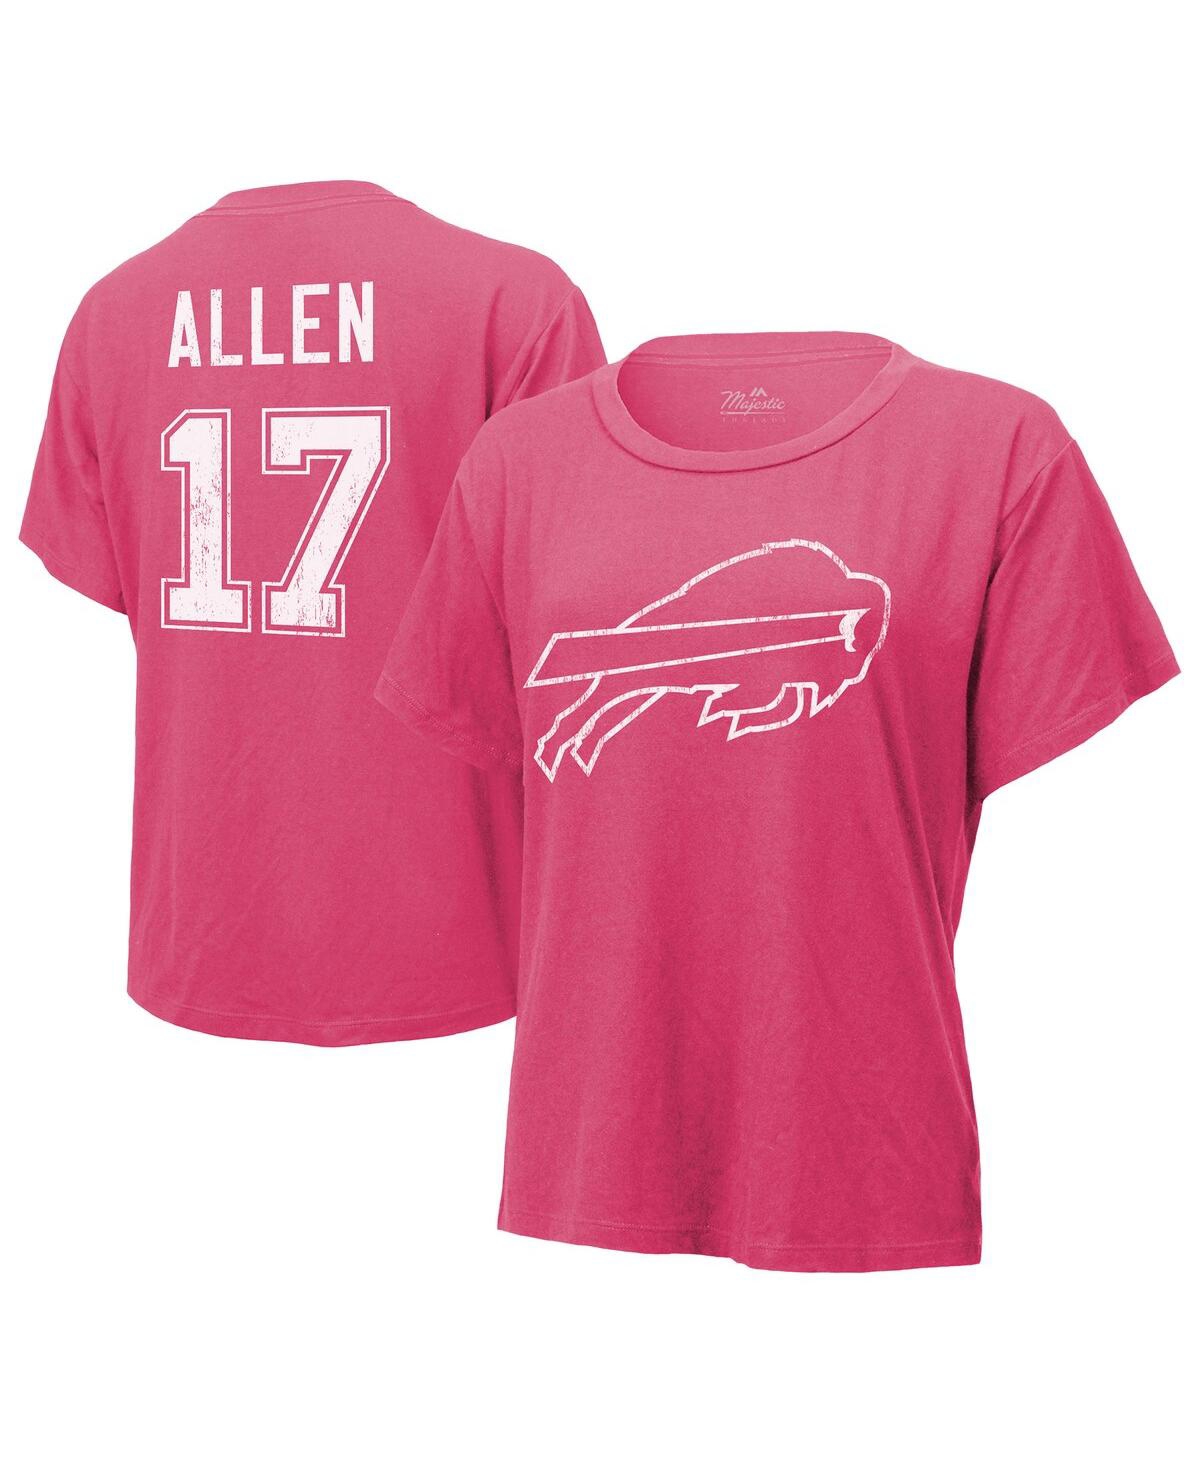 Women's Majestic Threads Josh Allen Pink Distressed Buffalo Bills Name and Number T-shirt - Pink